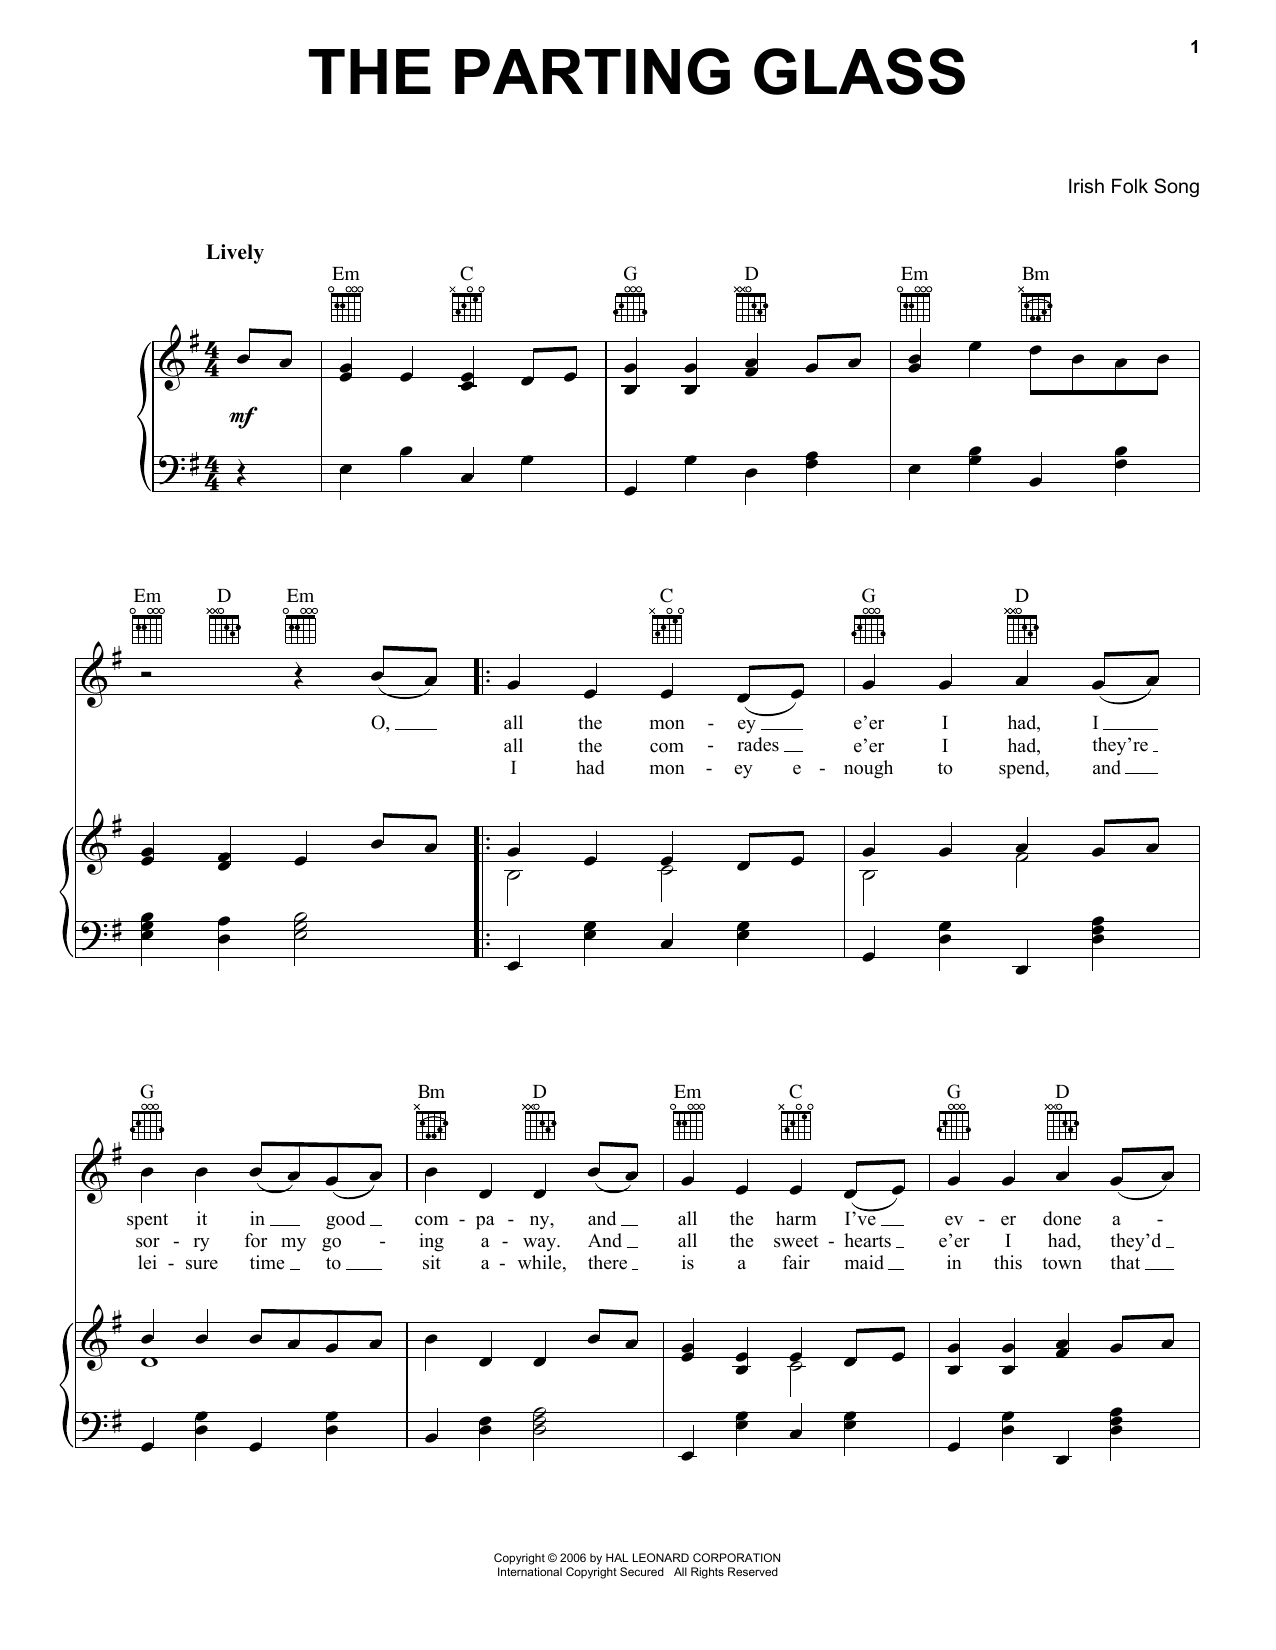 The Parting Glass sheet music